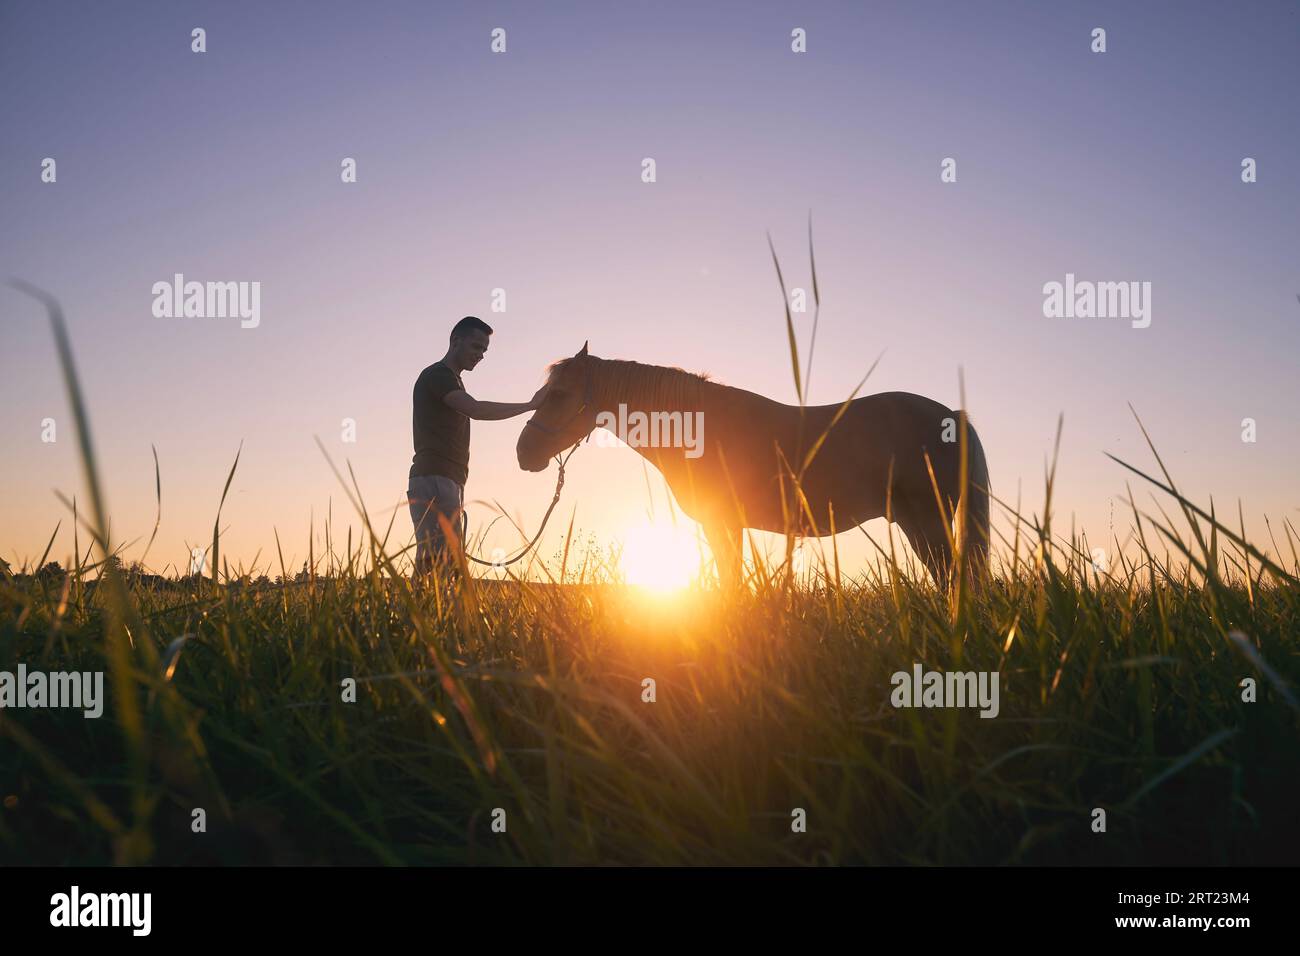 Silhousette of man while stroking of therapy horse on meadow at sunset. Themes hippotherapy, care and friendship between people and animals. Stock Photo